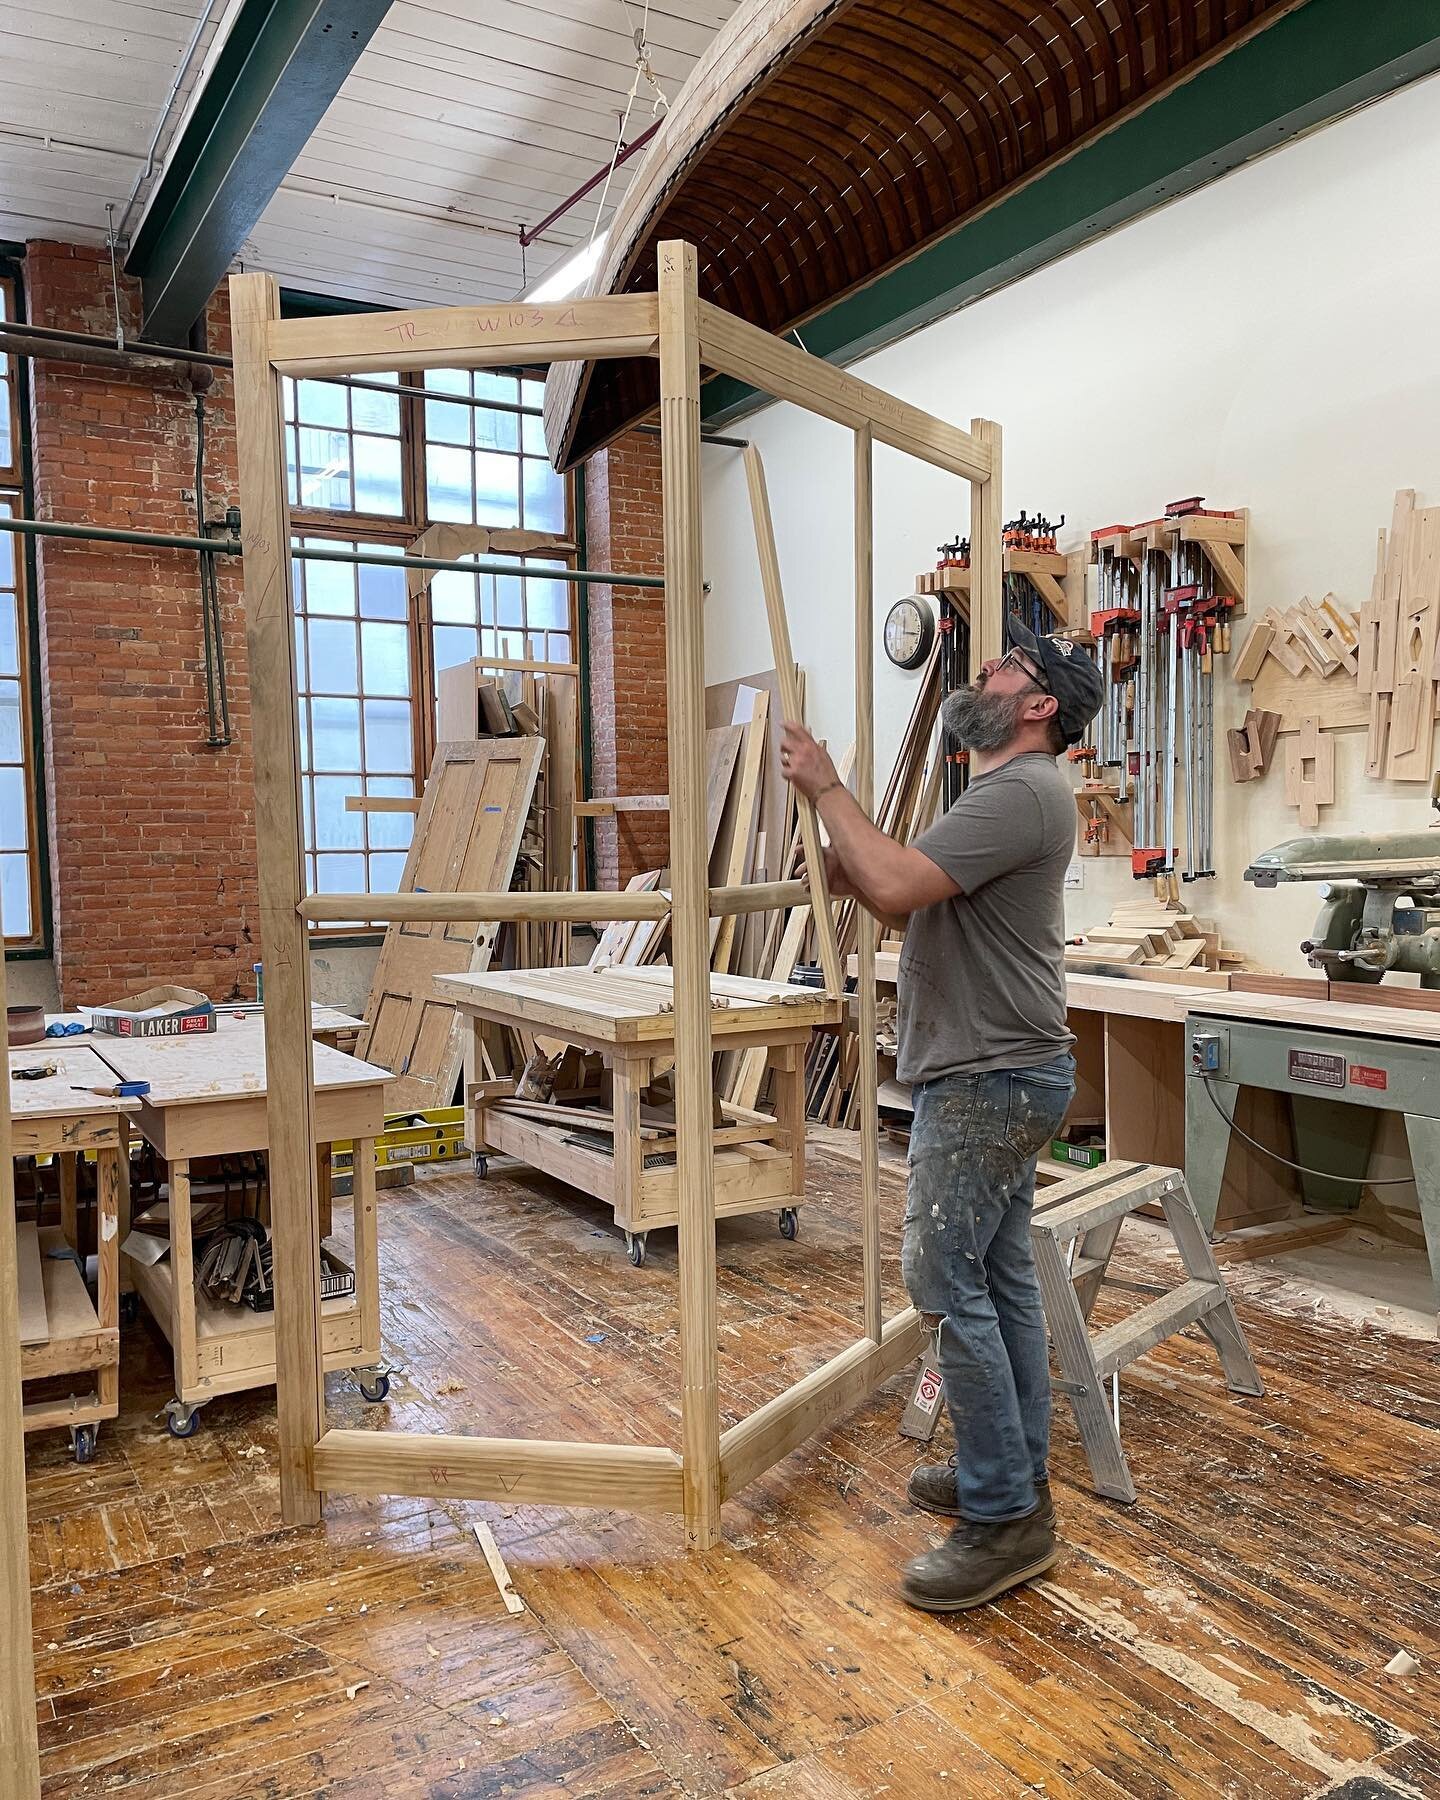 We&rsquo;re working on something really special and can&rsquo;t wait to share the final results.

#woodworker #historichomes #finefinishes  #restore  #rebuild #custommillwork #homedesign #architecture #hamilton #hamont #oldhouselove #thisoldhouse #ol